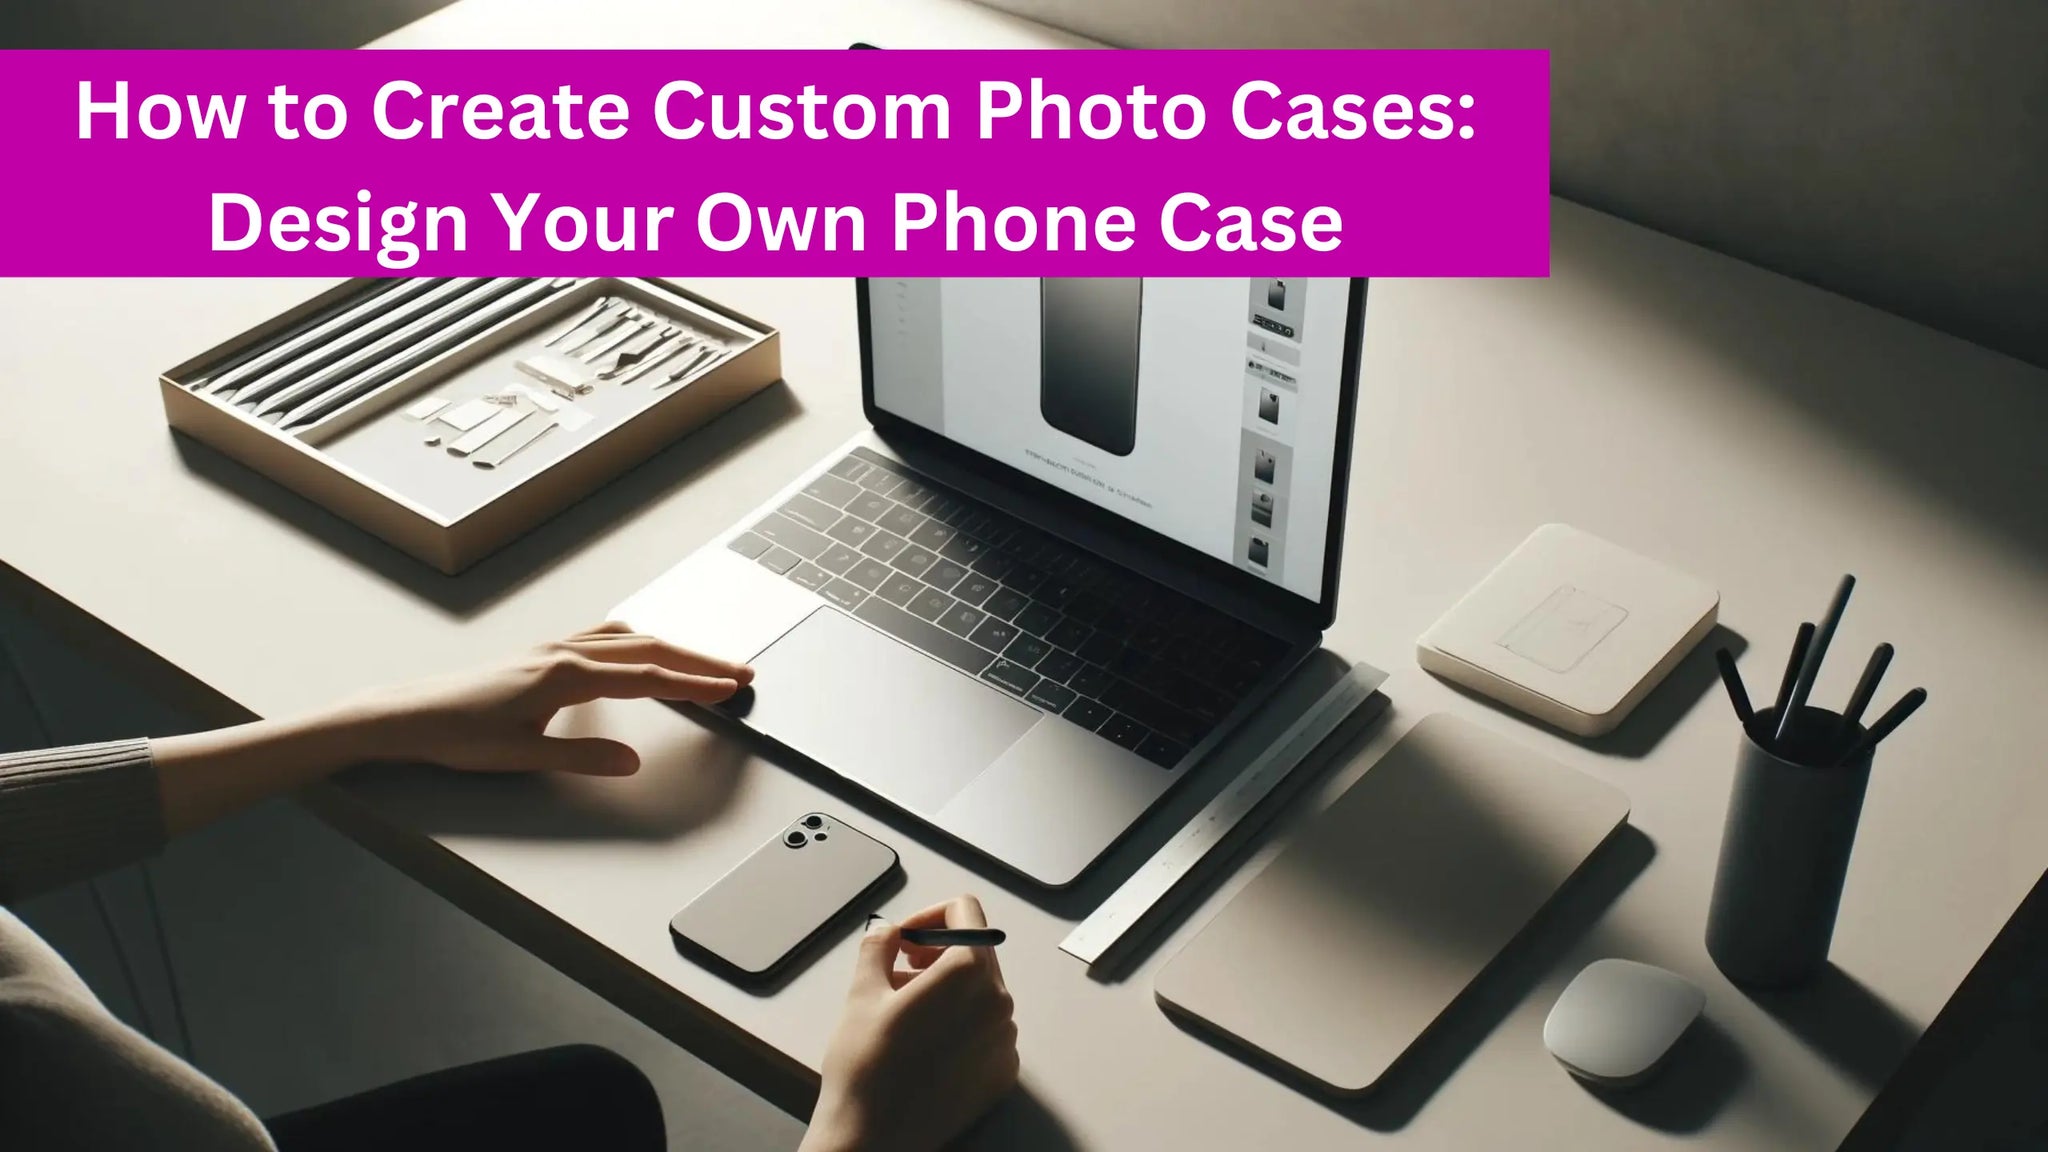 How to Create Custom Photo Cases: Design Your Own Phone Case